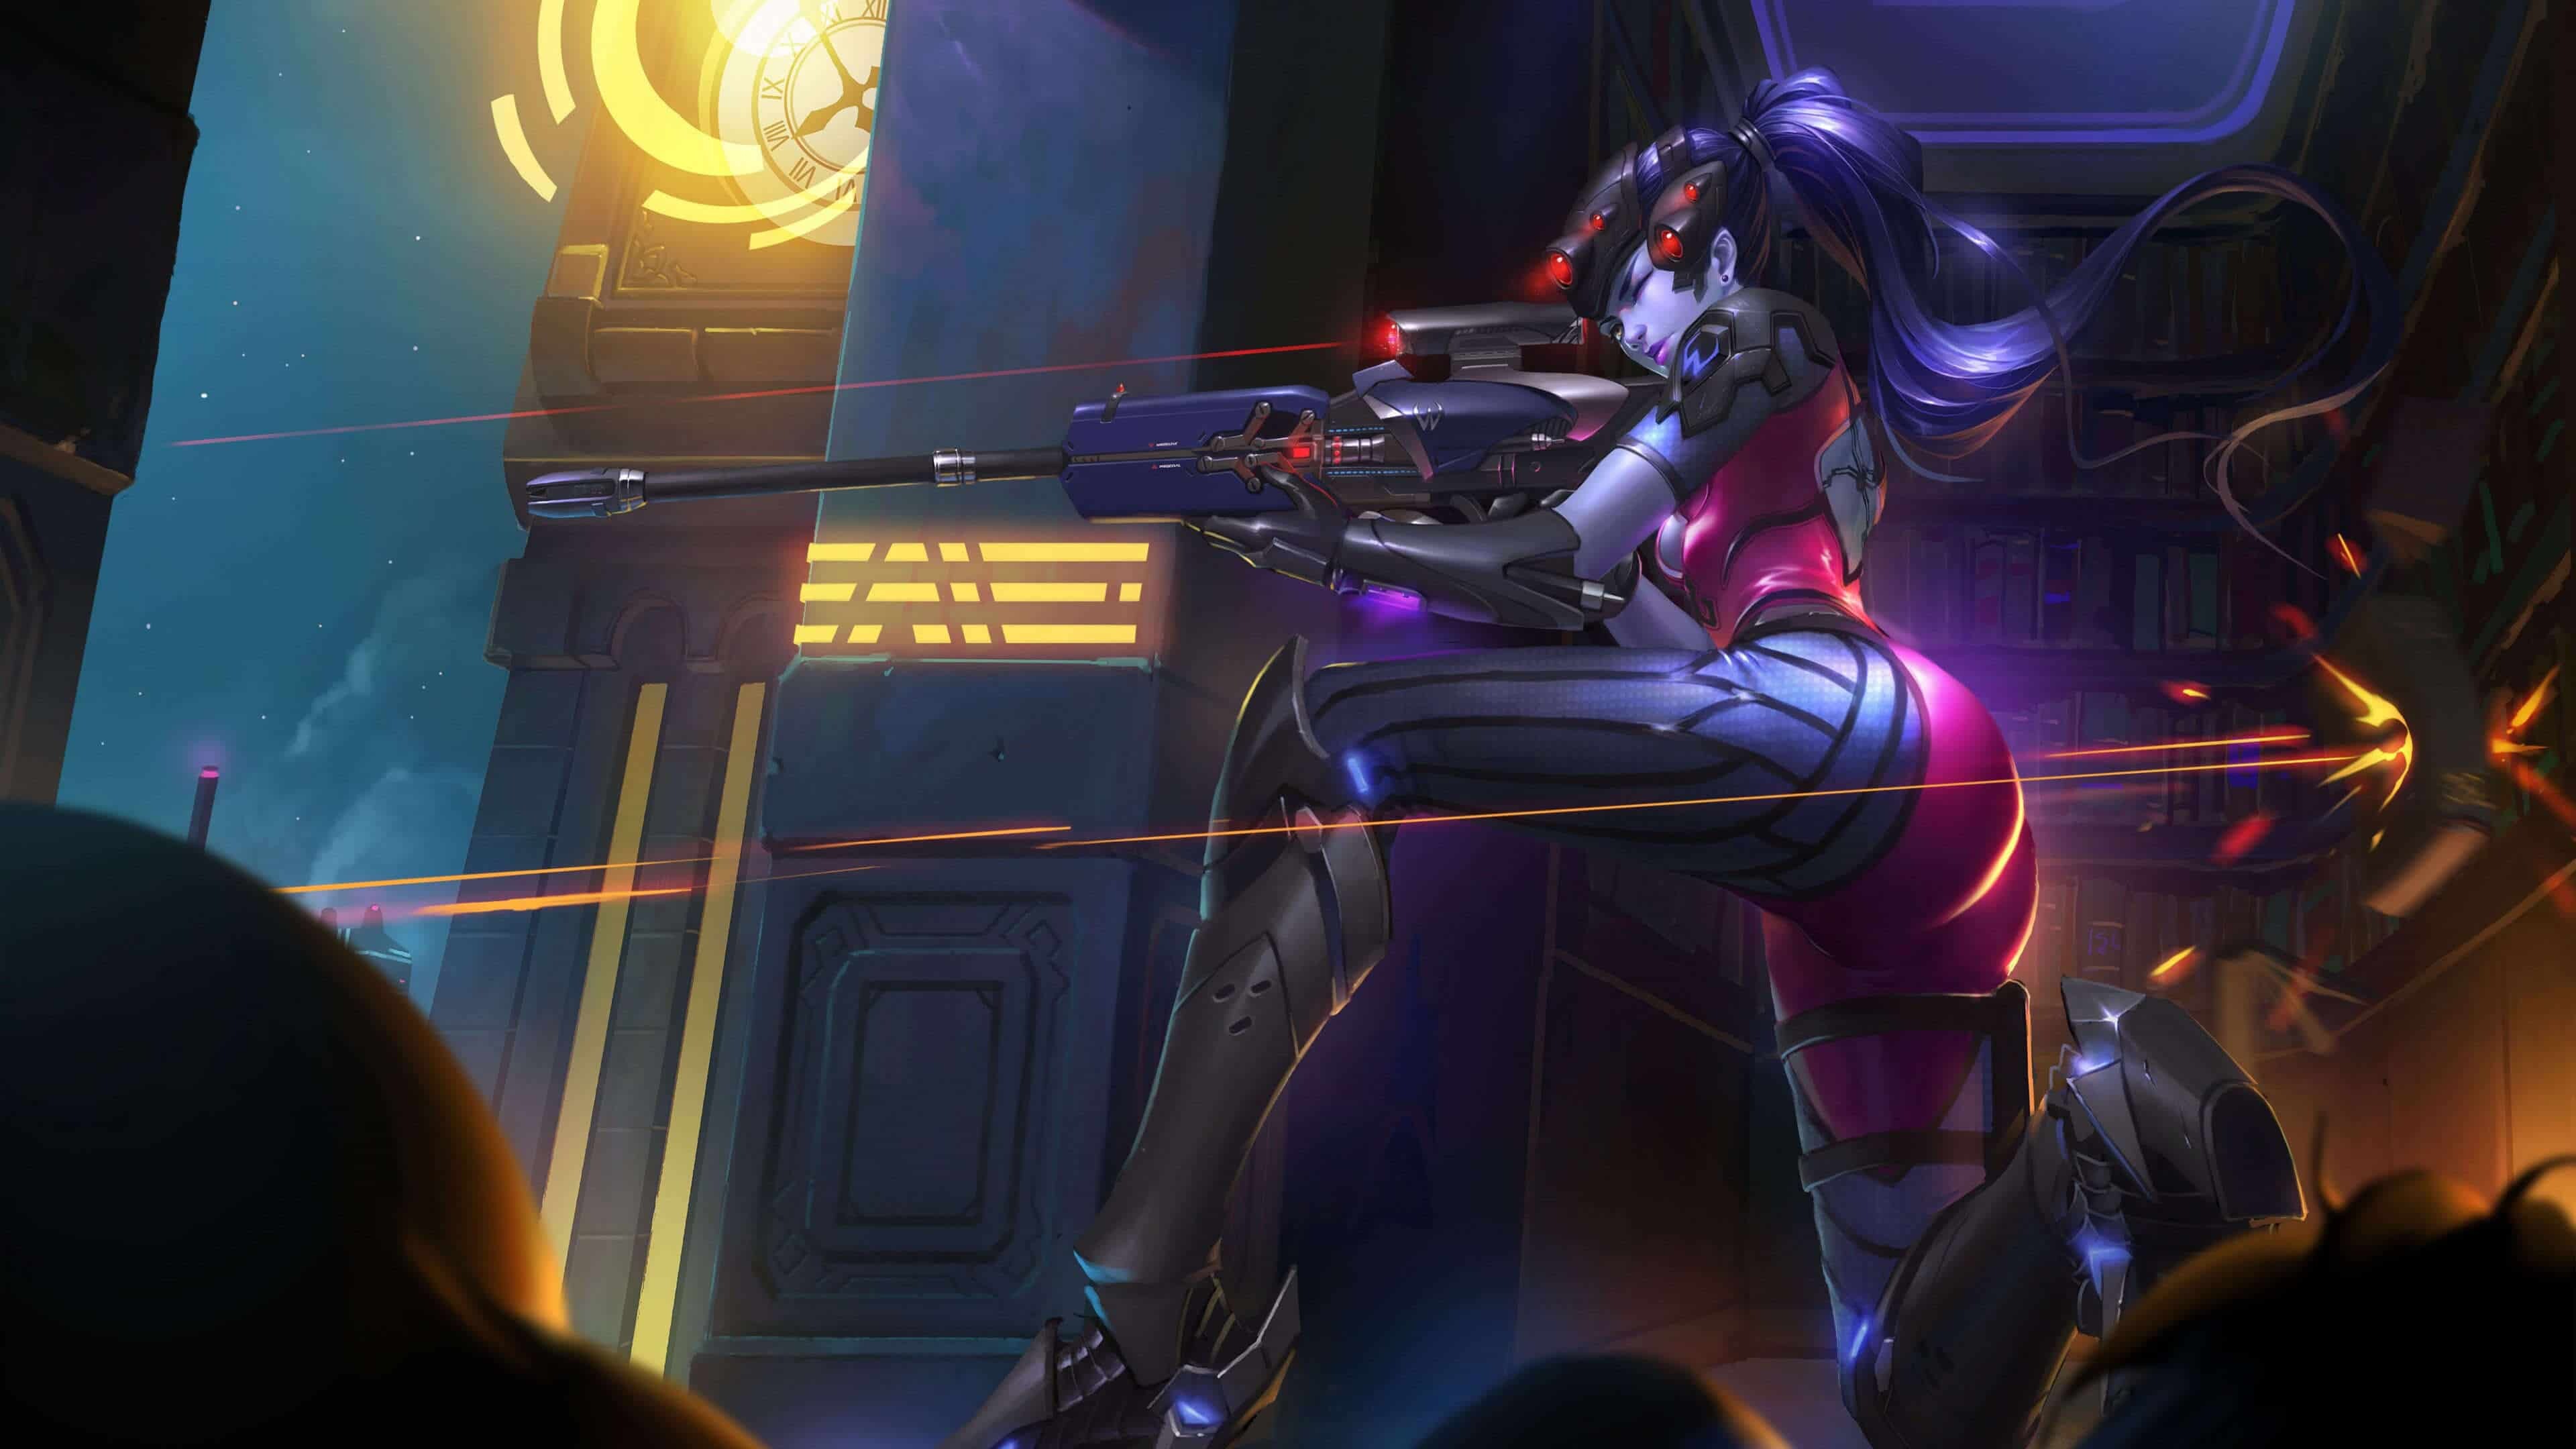 Overwatch: Widowmaker, Amelie Lacroix, The archetypical sniper. 3840x2160 4K Background.